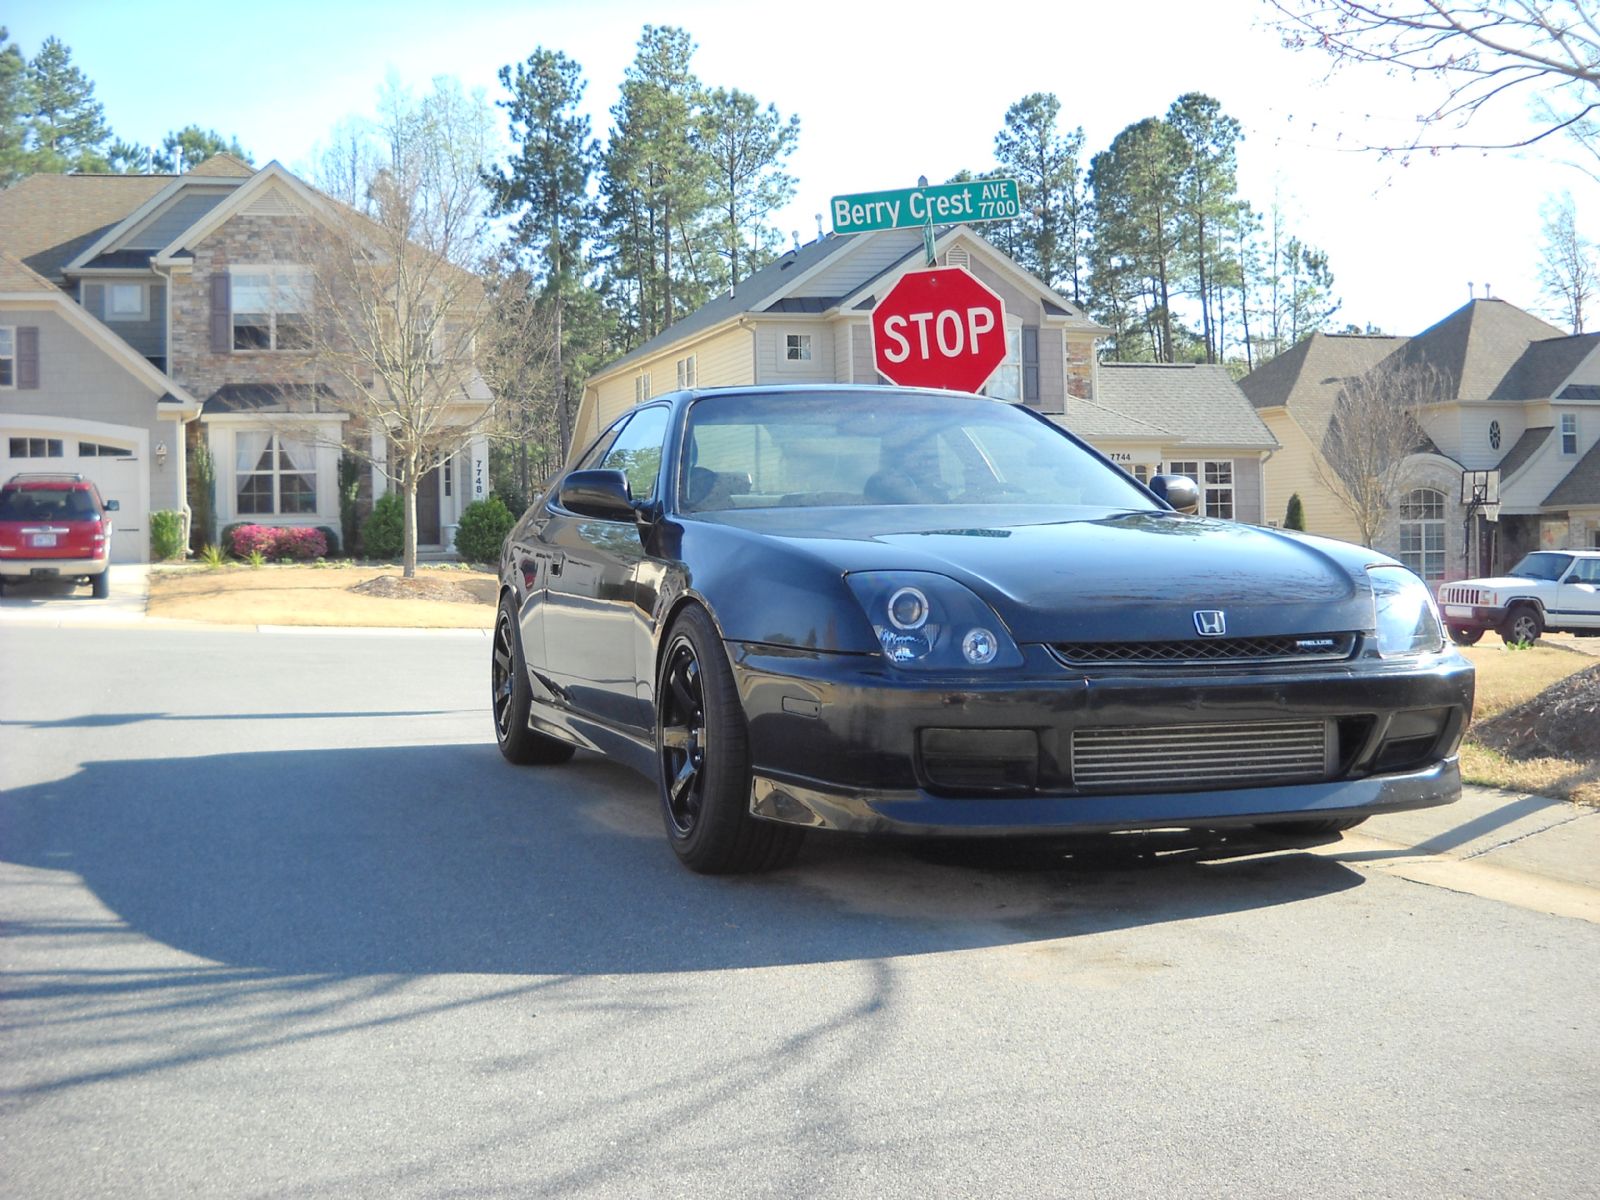 Honda prelude for sale in raleigh nc #2